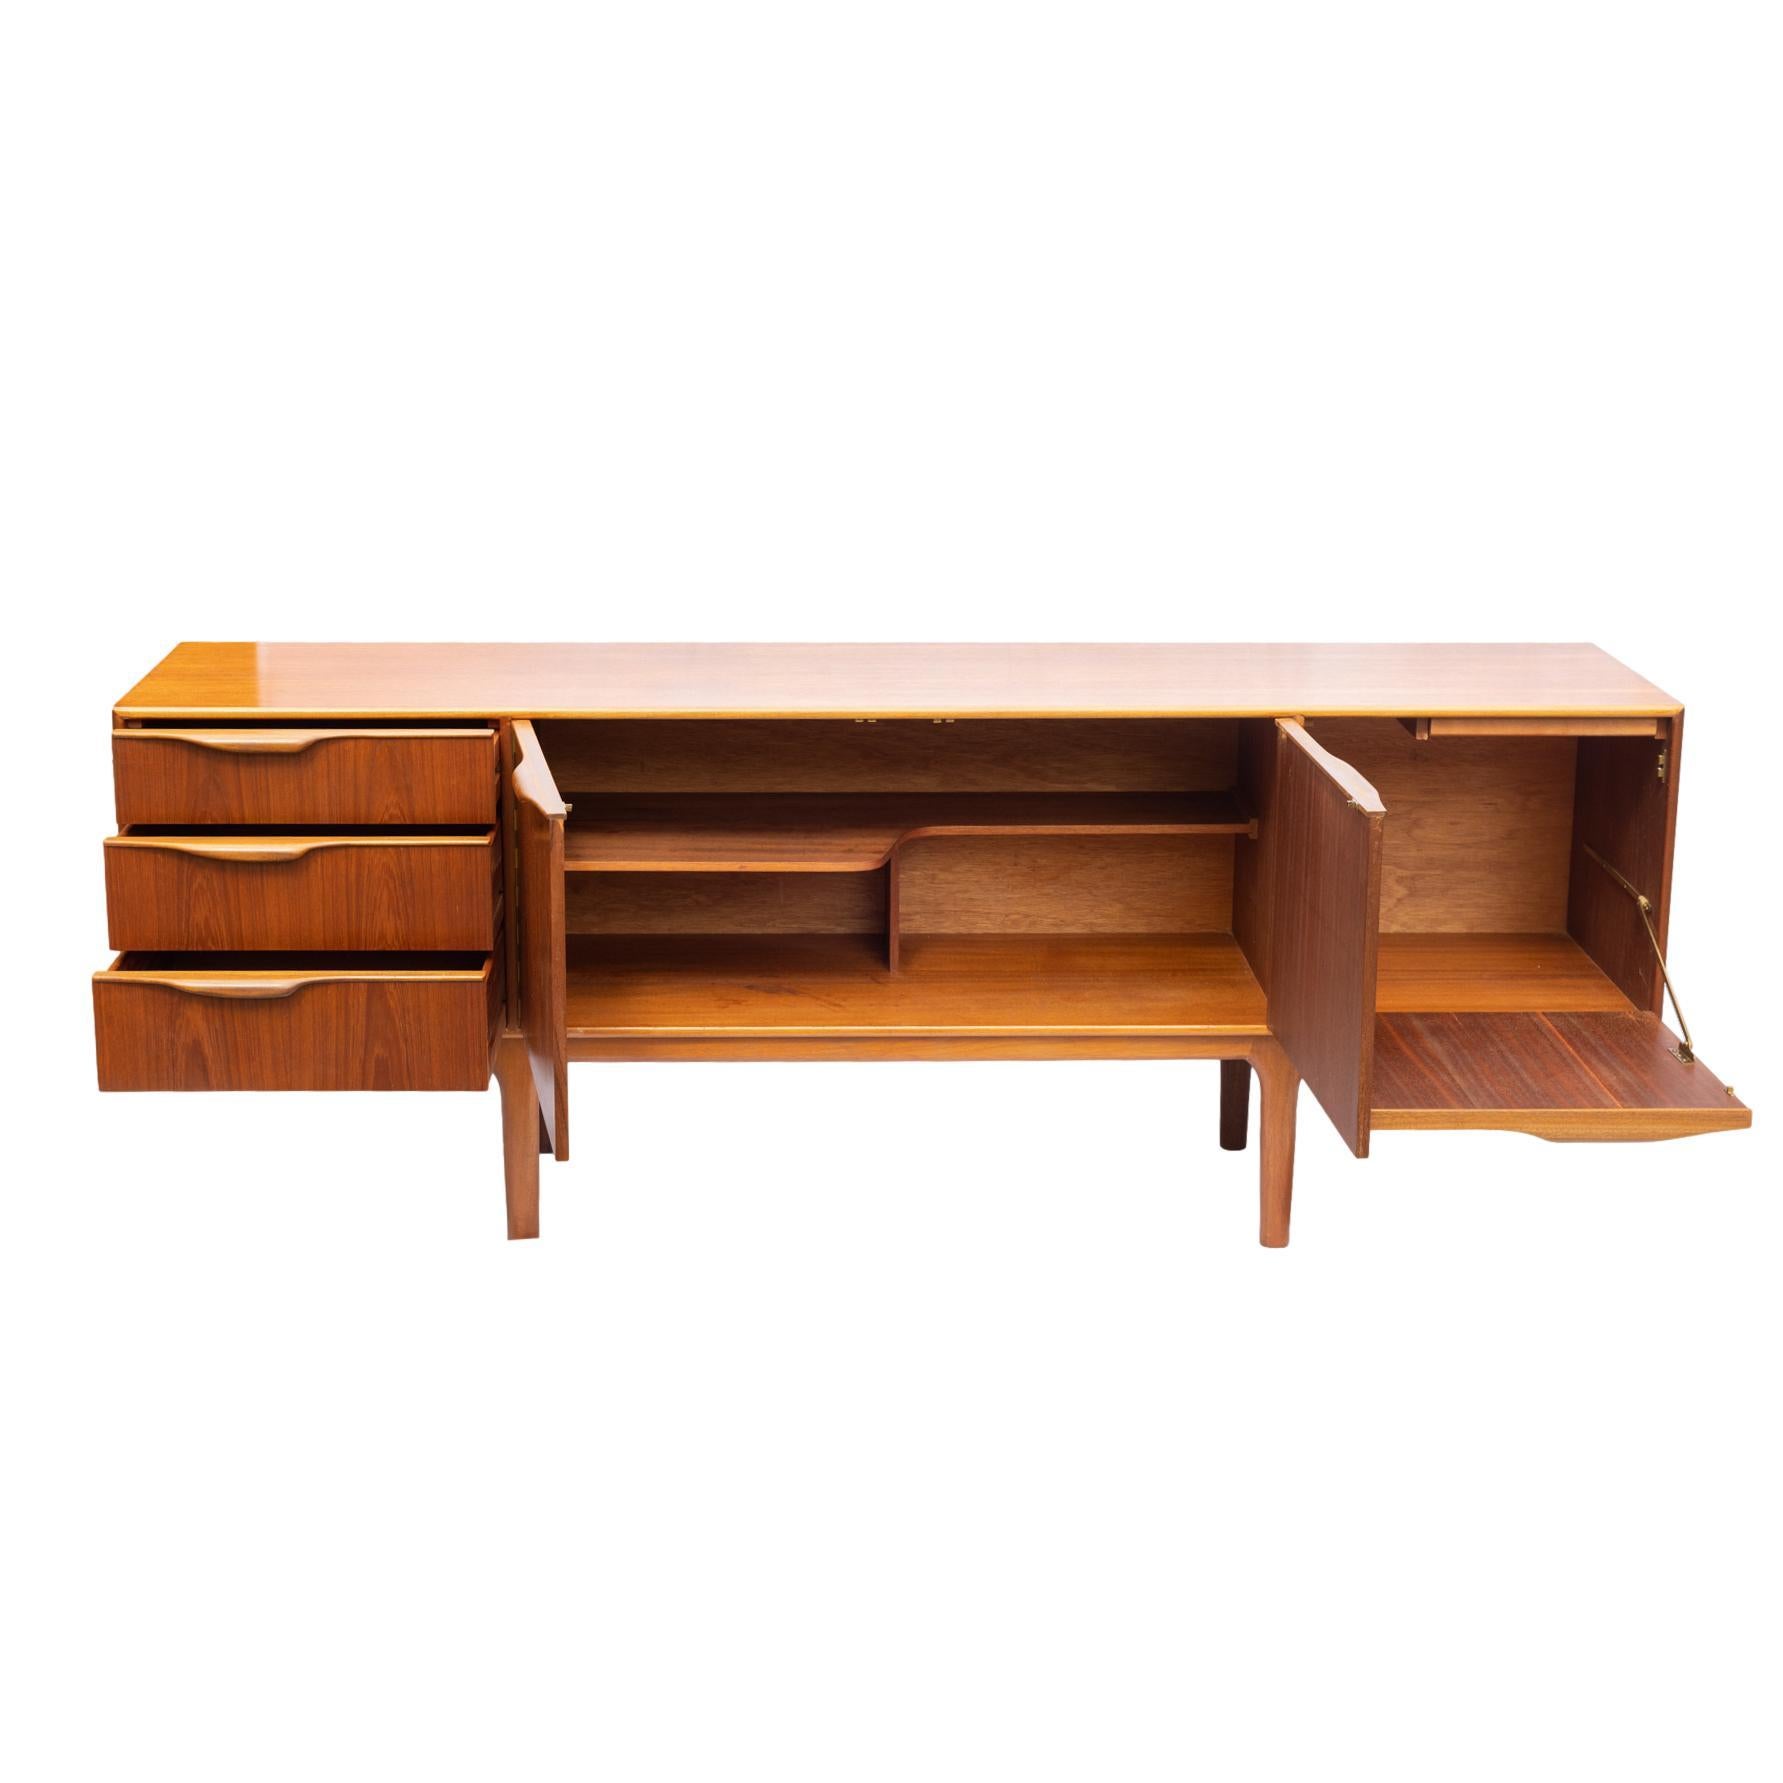 Mid-Century Modern Teak and Oak Sideboard, the streamlined form with two figured teak central cabinets, flanked by a row of three drawers and a bar cabinet with a cocktail slide, with molded and applied sculptural bars forming the pulls, on a Danish